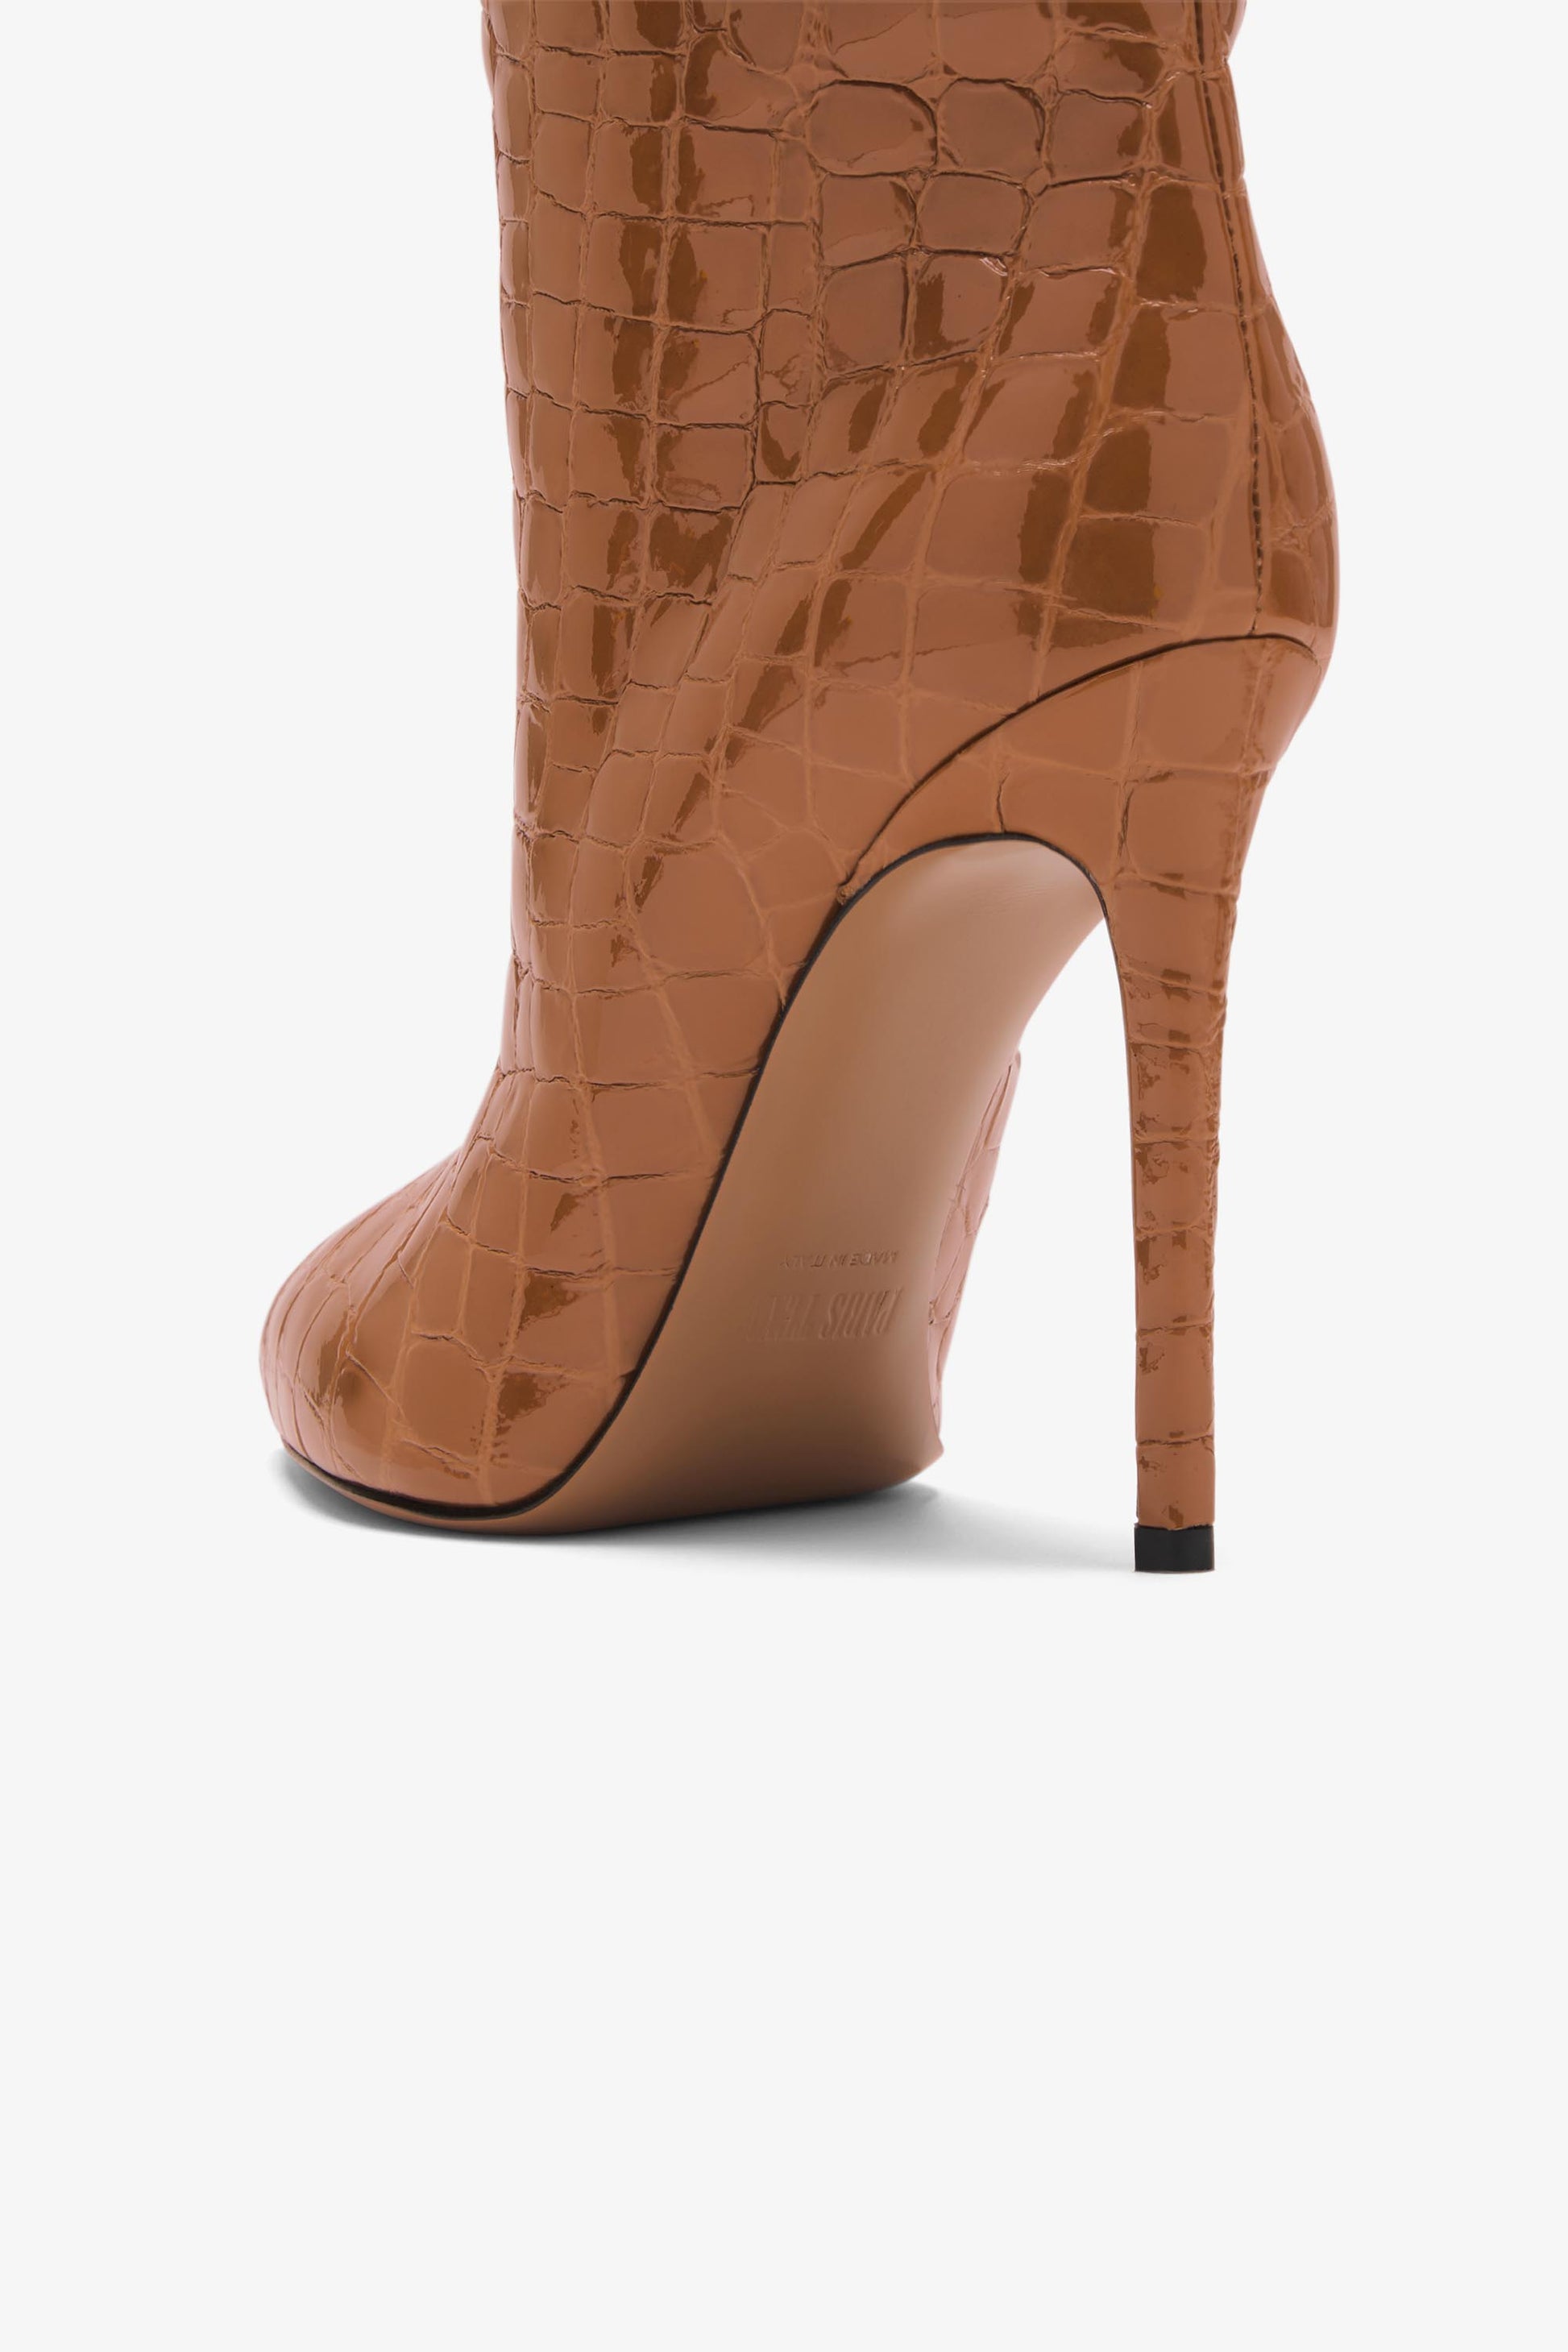 Tan embossed leather boot